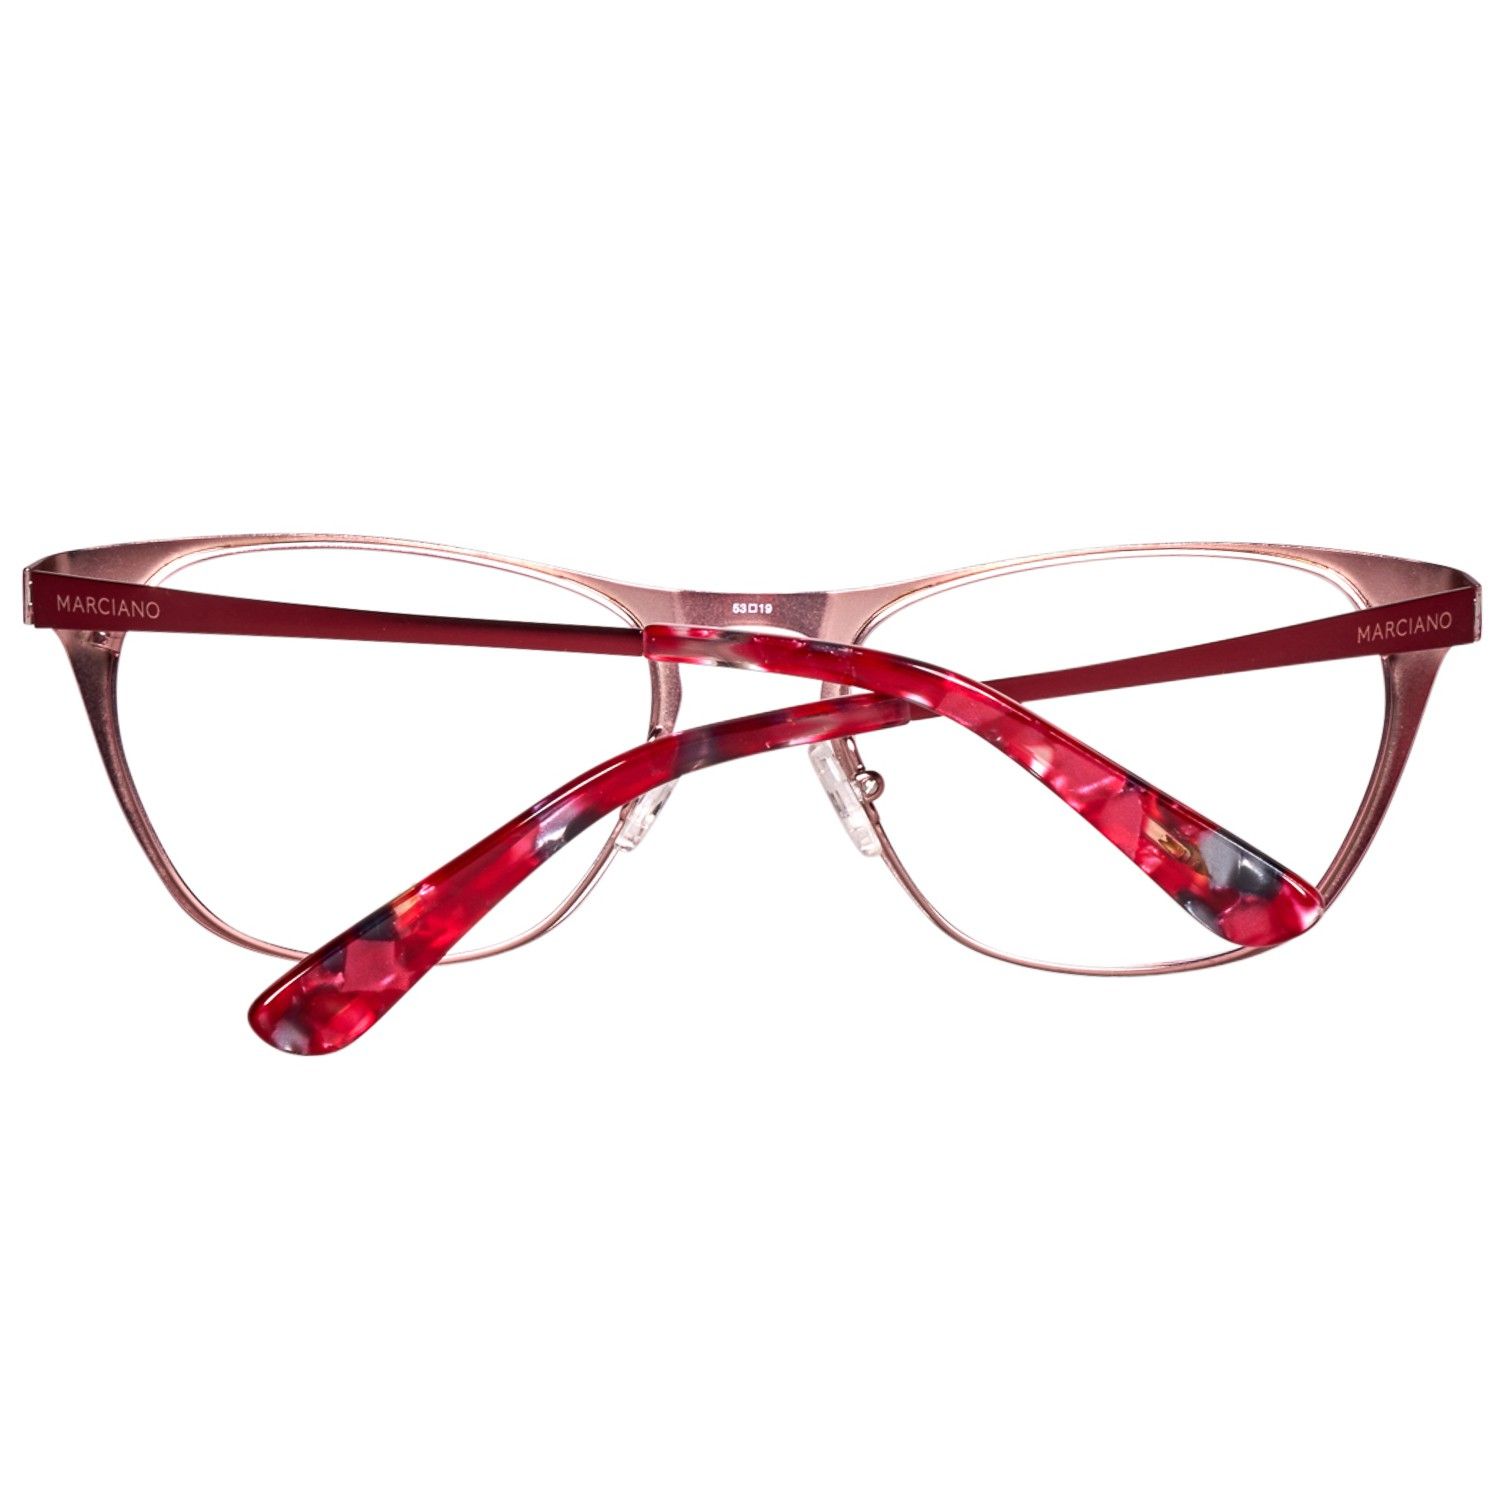 Guess By Marciano Optical Frame GM0240 F61 53
Frame color: Red
Lenses width: 53
Lenses heigth: 15
Bridge length: 19
Frame width: 135
Temple length: 135
Shipment includes: Case, Cleaning cloth
Style: Full-Rim
Women: Women